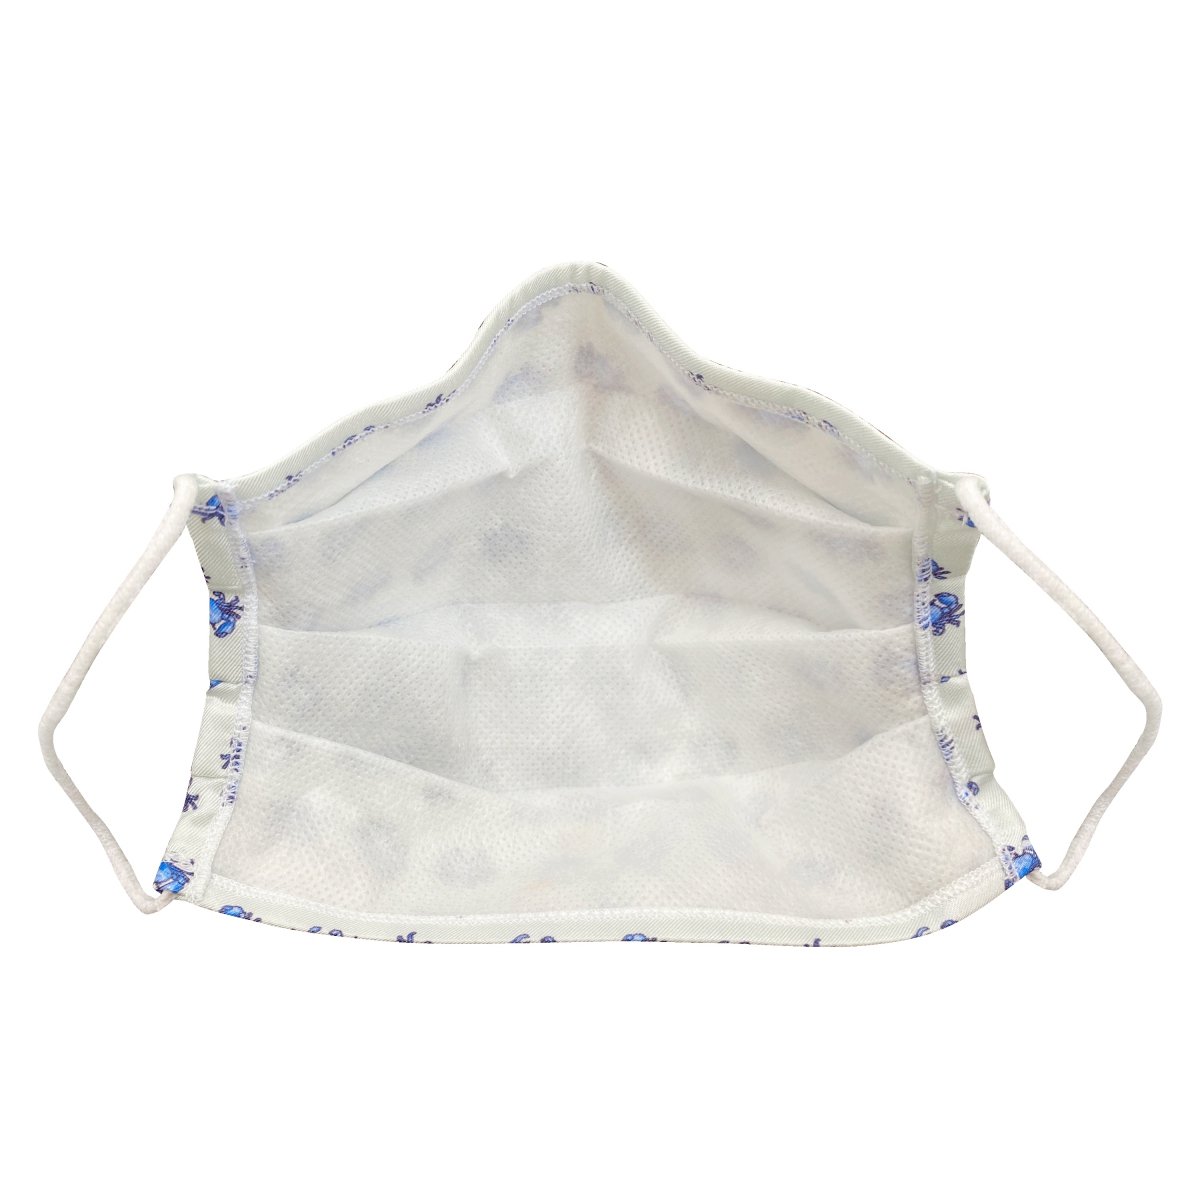 Fashion protective fabric mask, silk, white with crabs